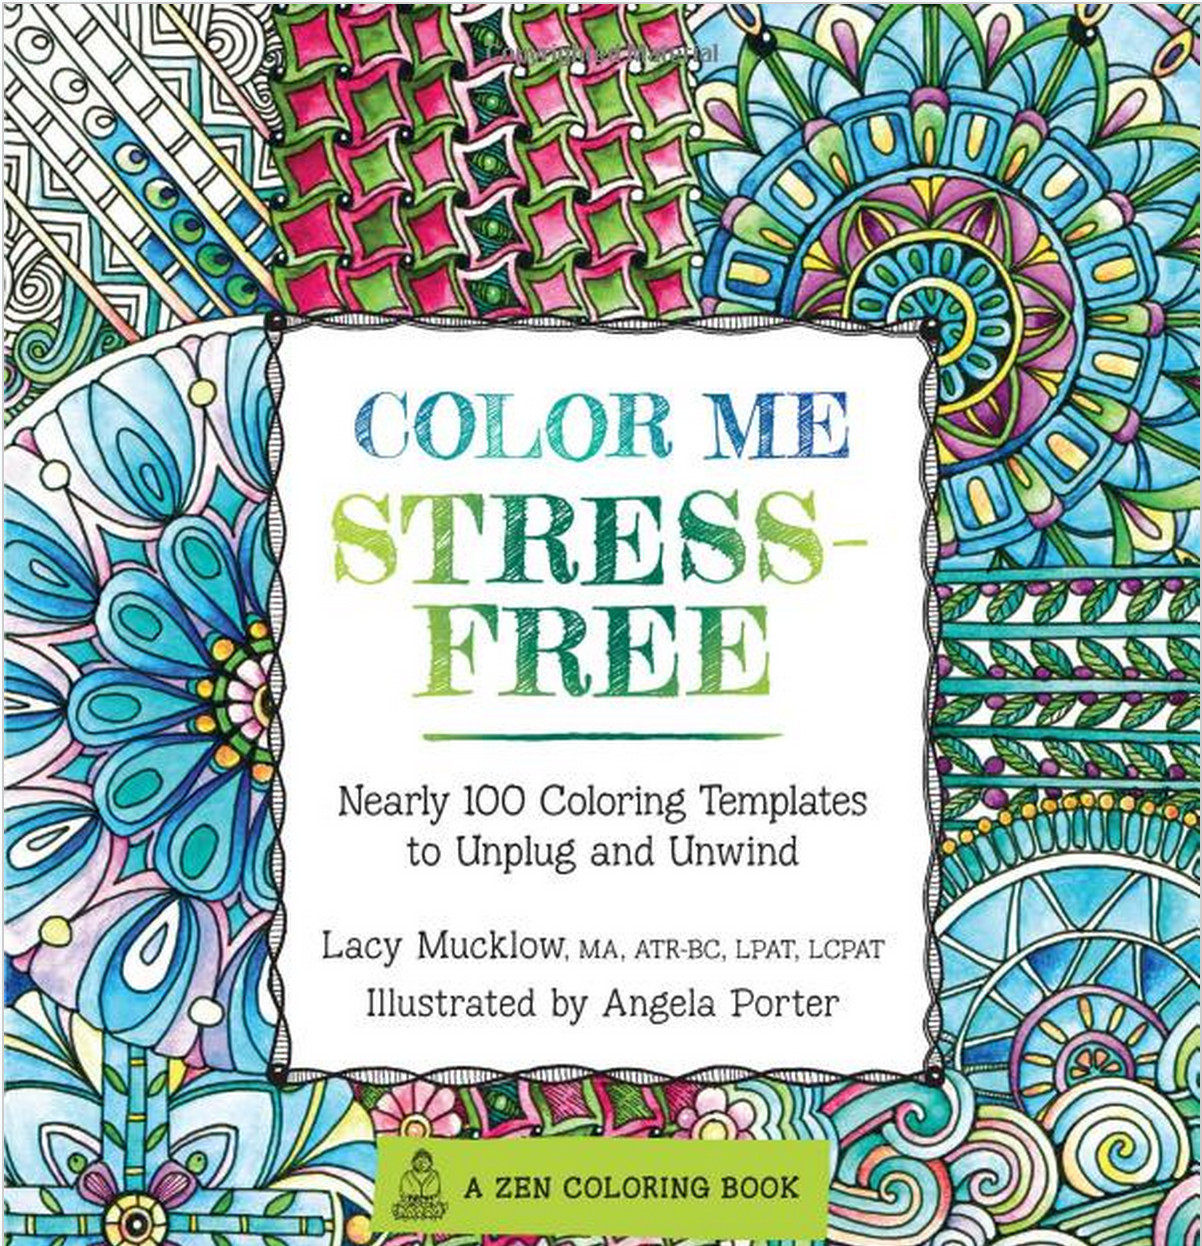 Best Coloring Books For Adults
 The 21 Best Adult Coloring Books You Can Buy